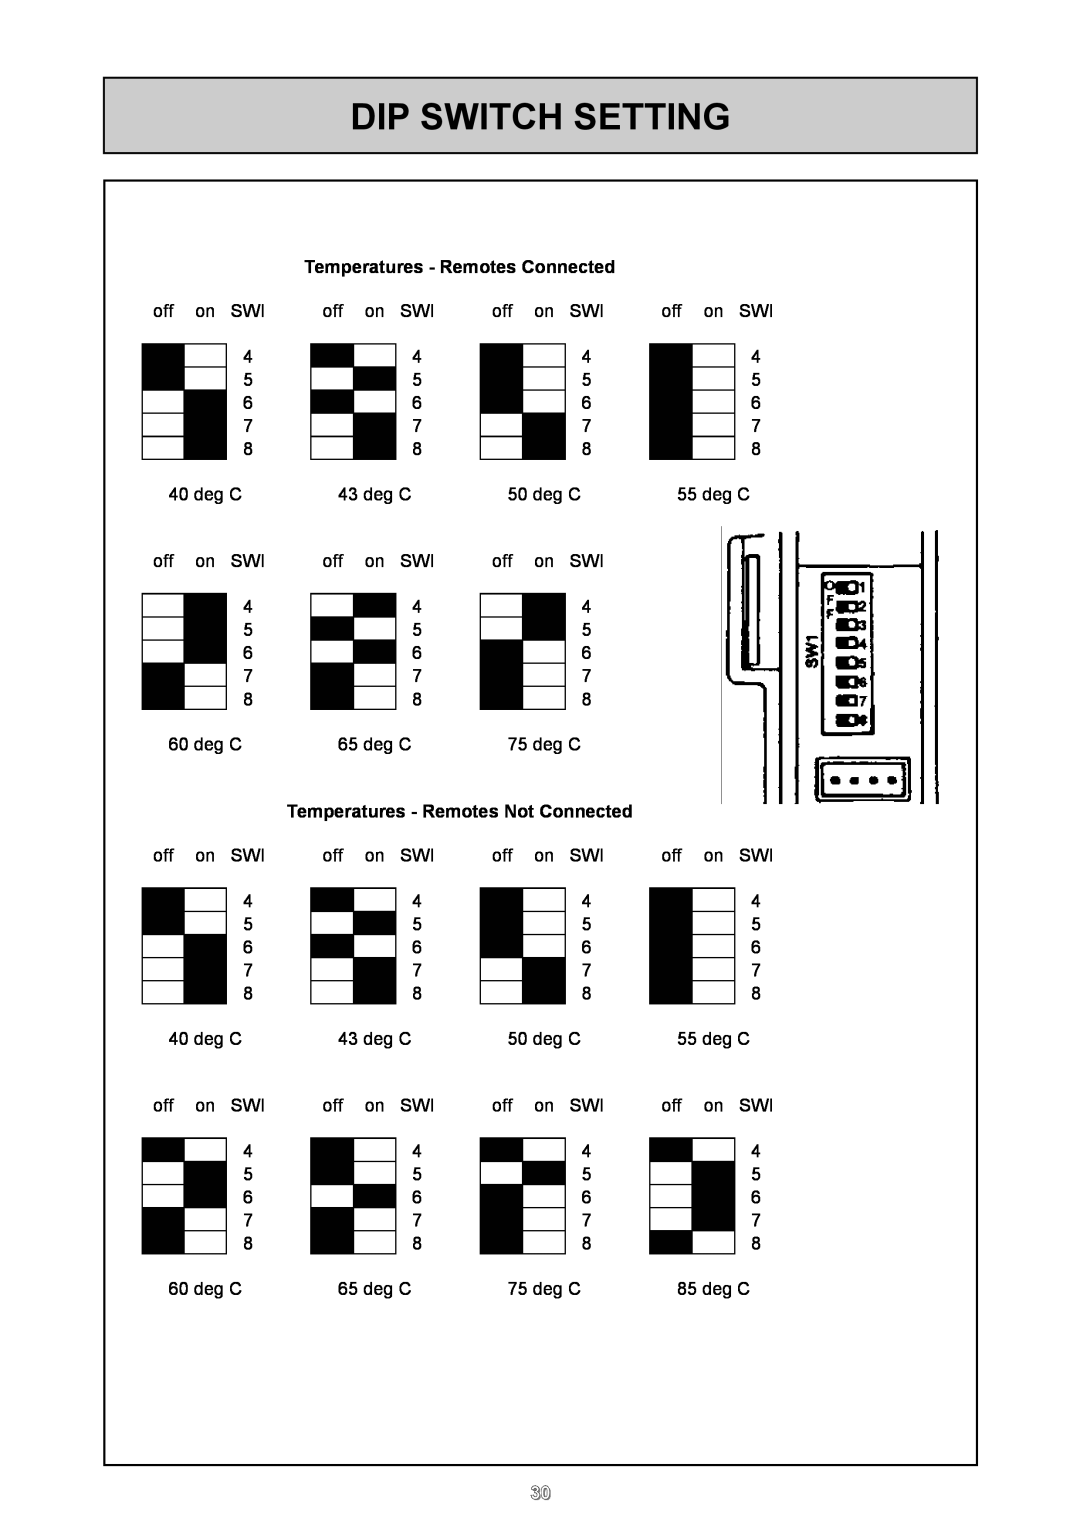 Rinnai 24e user manual Dip Switch Setting, Temperatures - Remotes Connected, Temperatures - Remotes Not Connected 